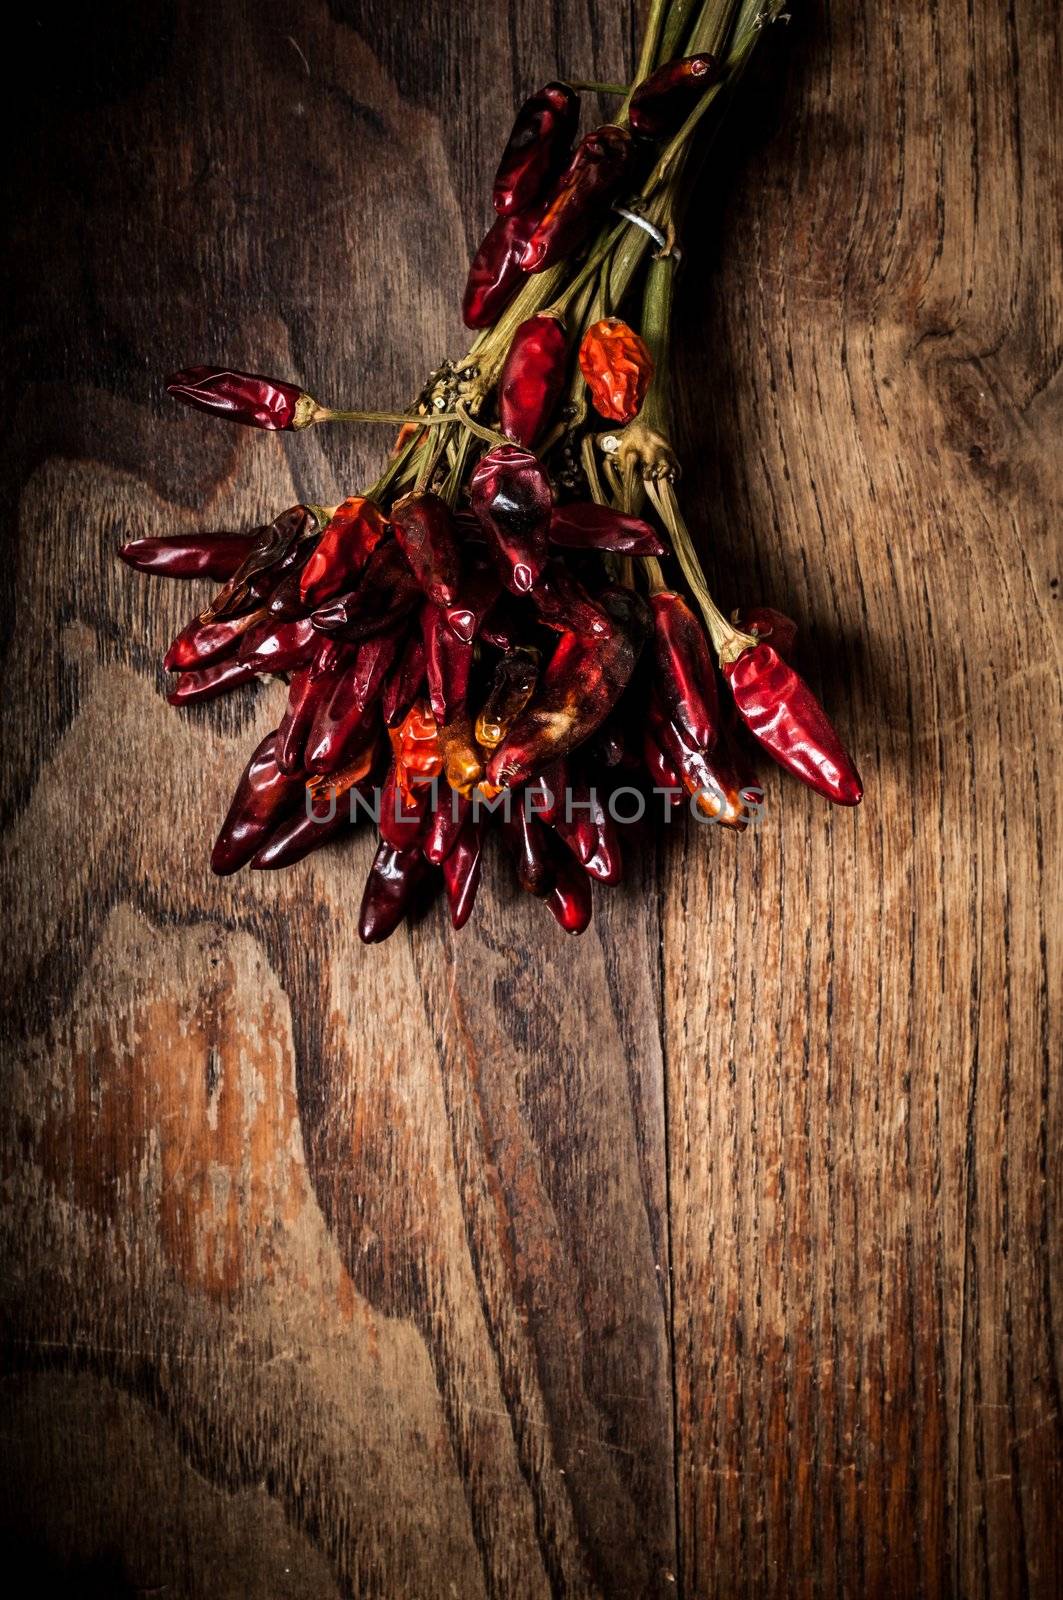 dried hot red chilies on brown textured wood